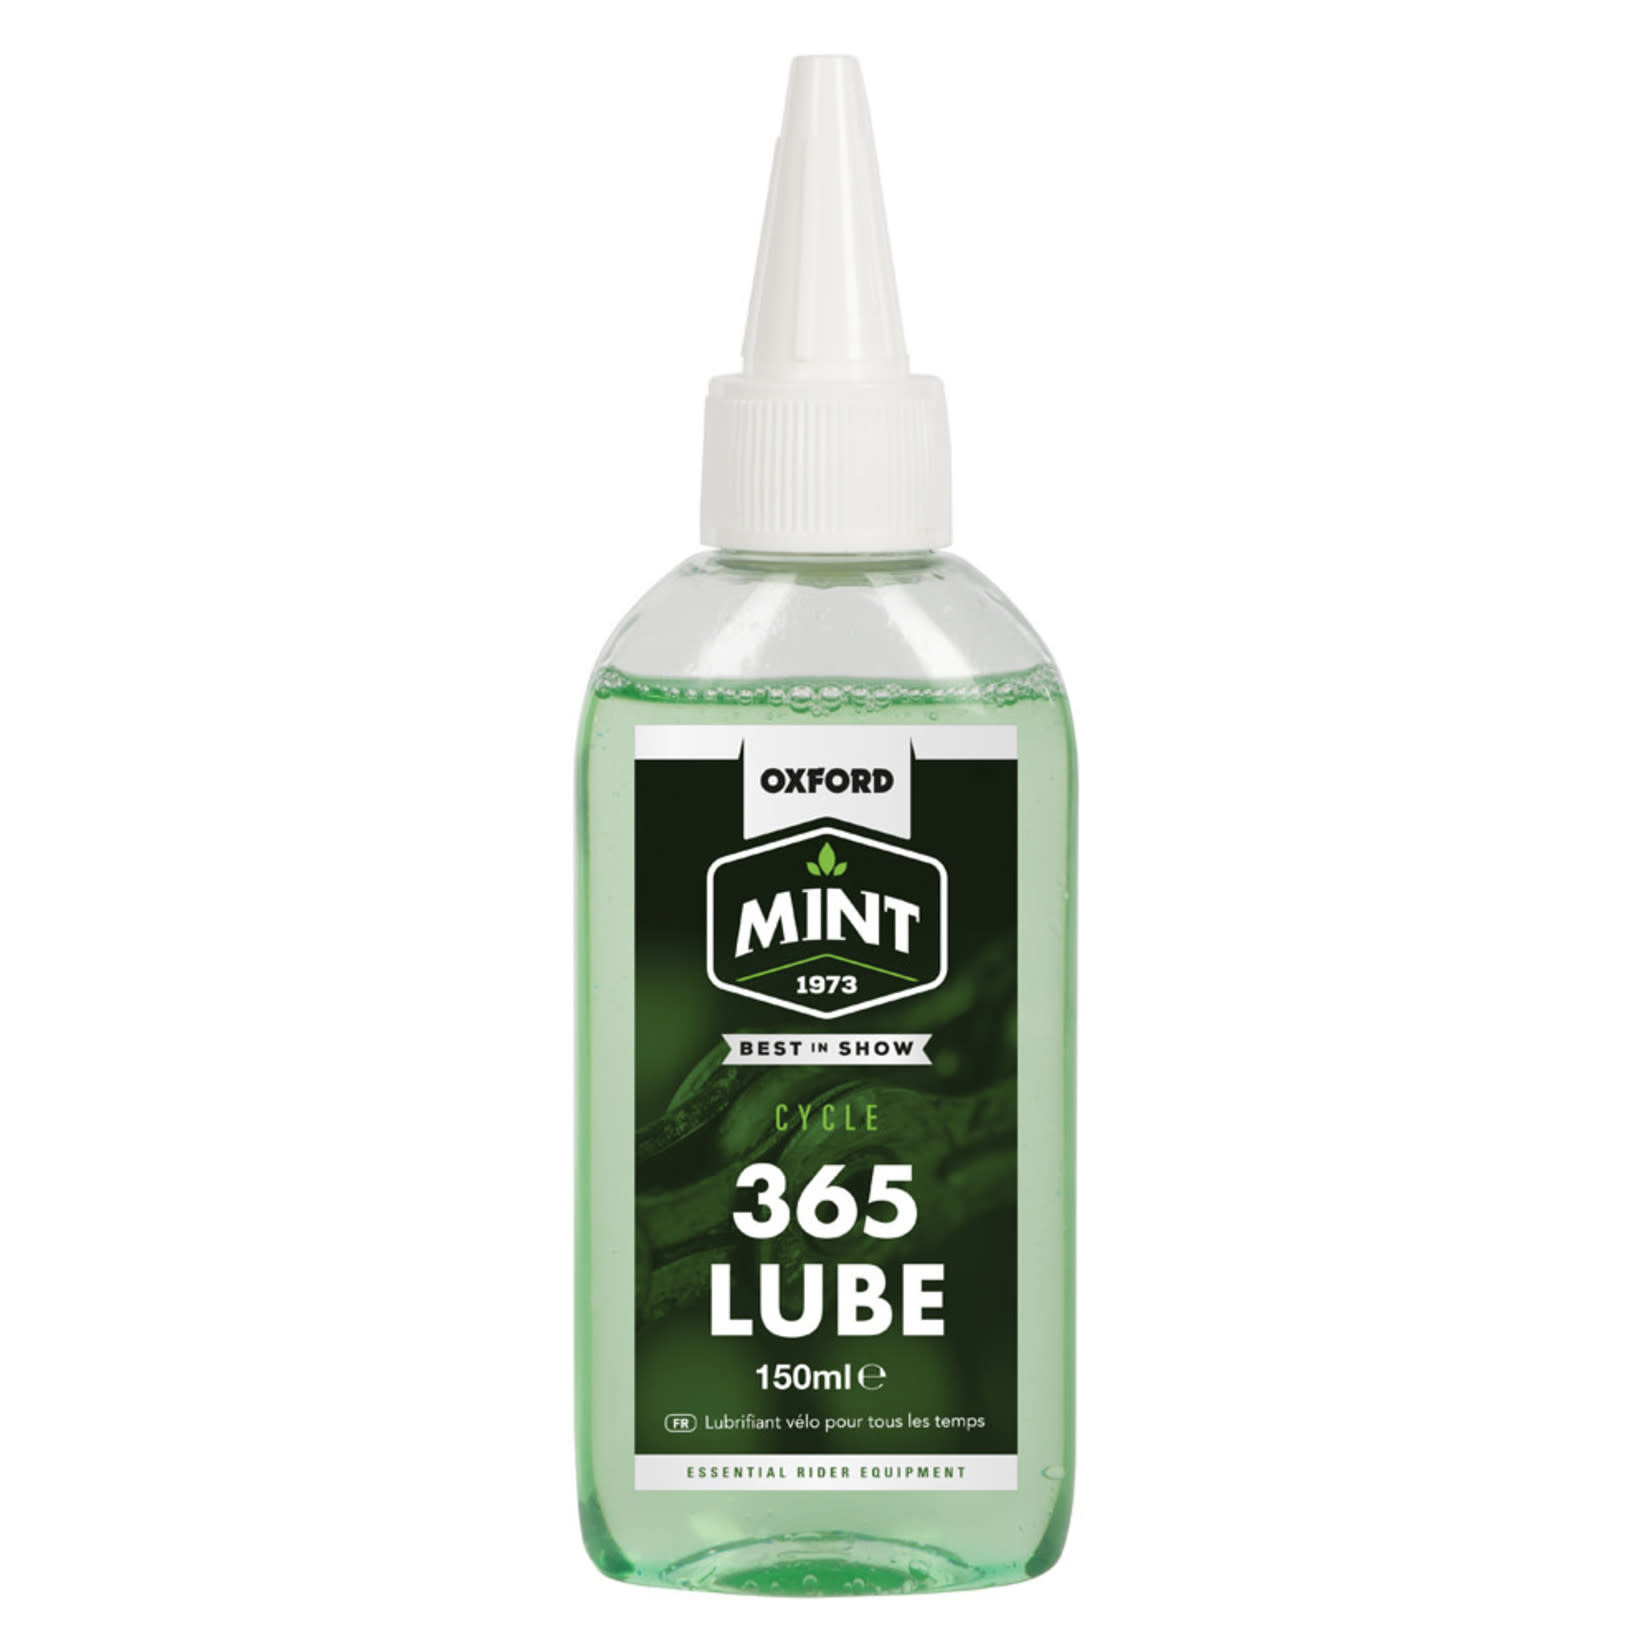 OXFORD MINT 365 Lube Toutes Conditions 150ml